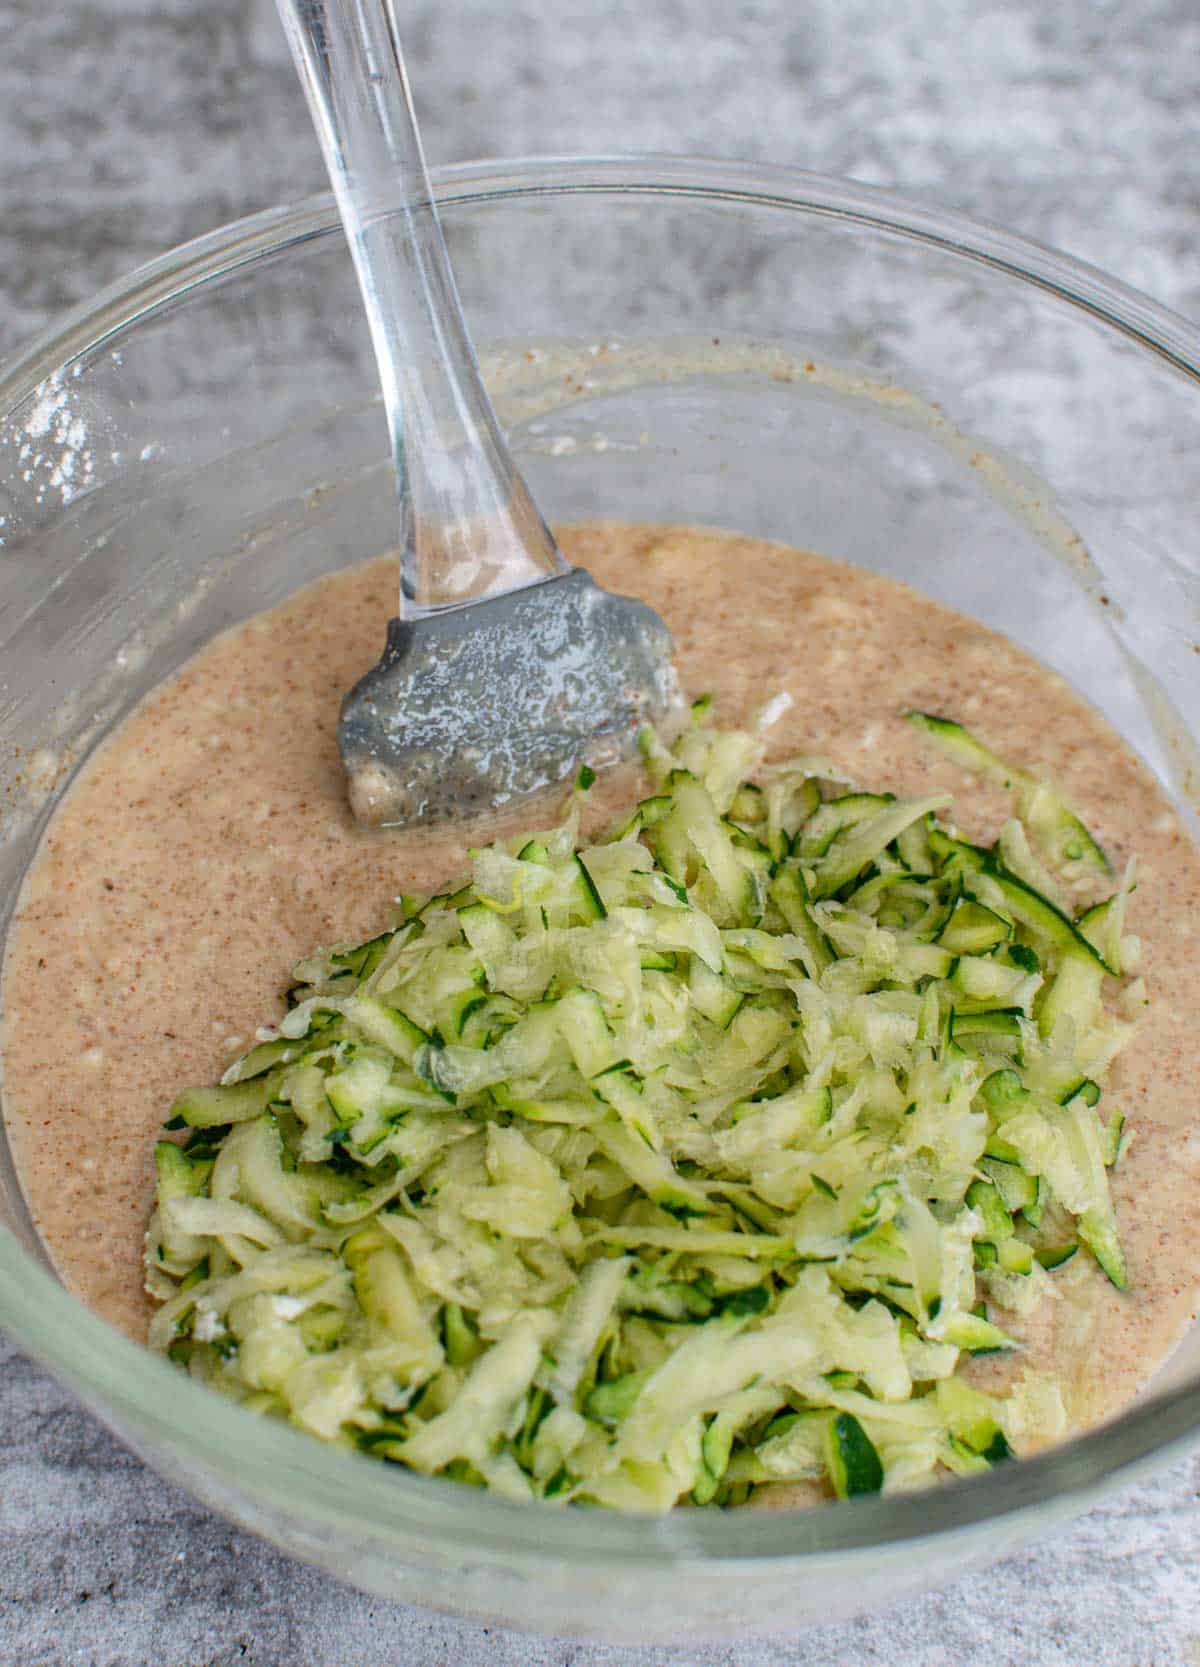 Muffin batter with shredded zucchini in a bowl.